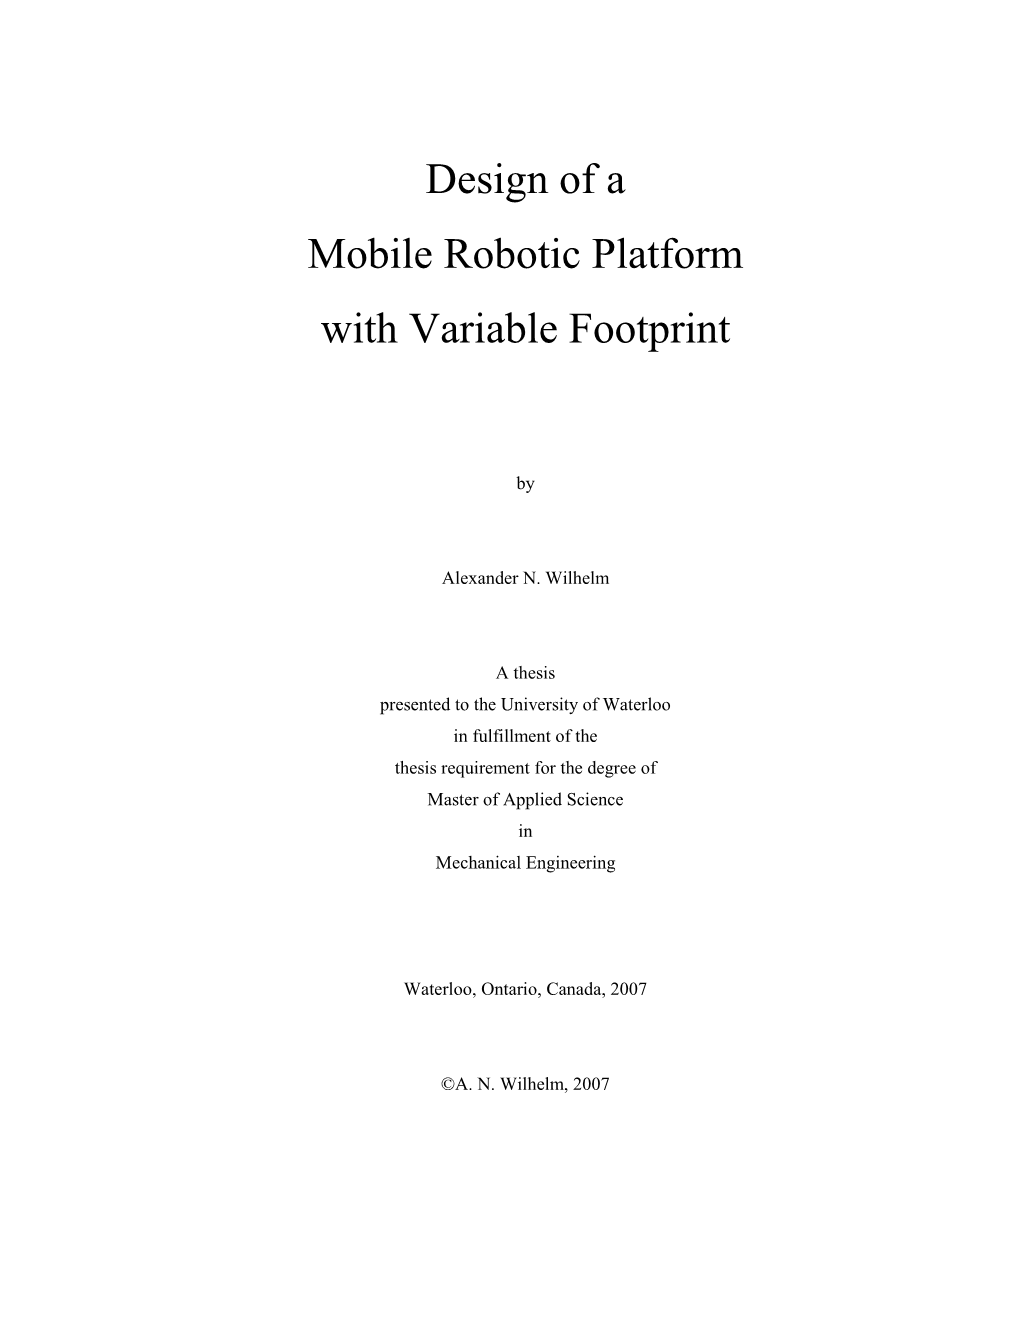 Design of a Mobile Robotic Platform with Variable Footprint